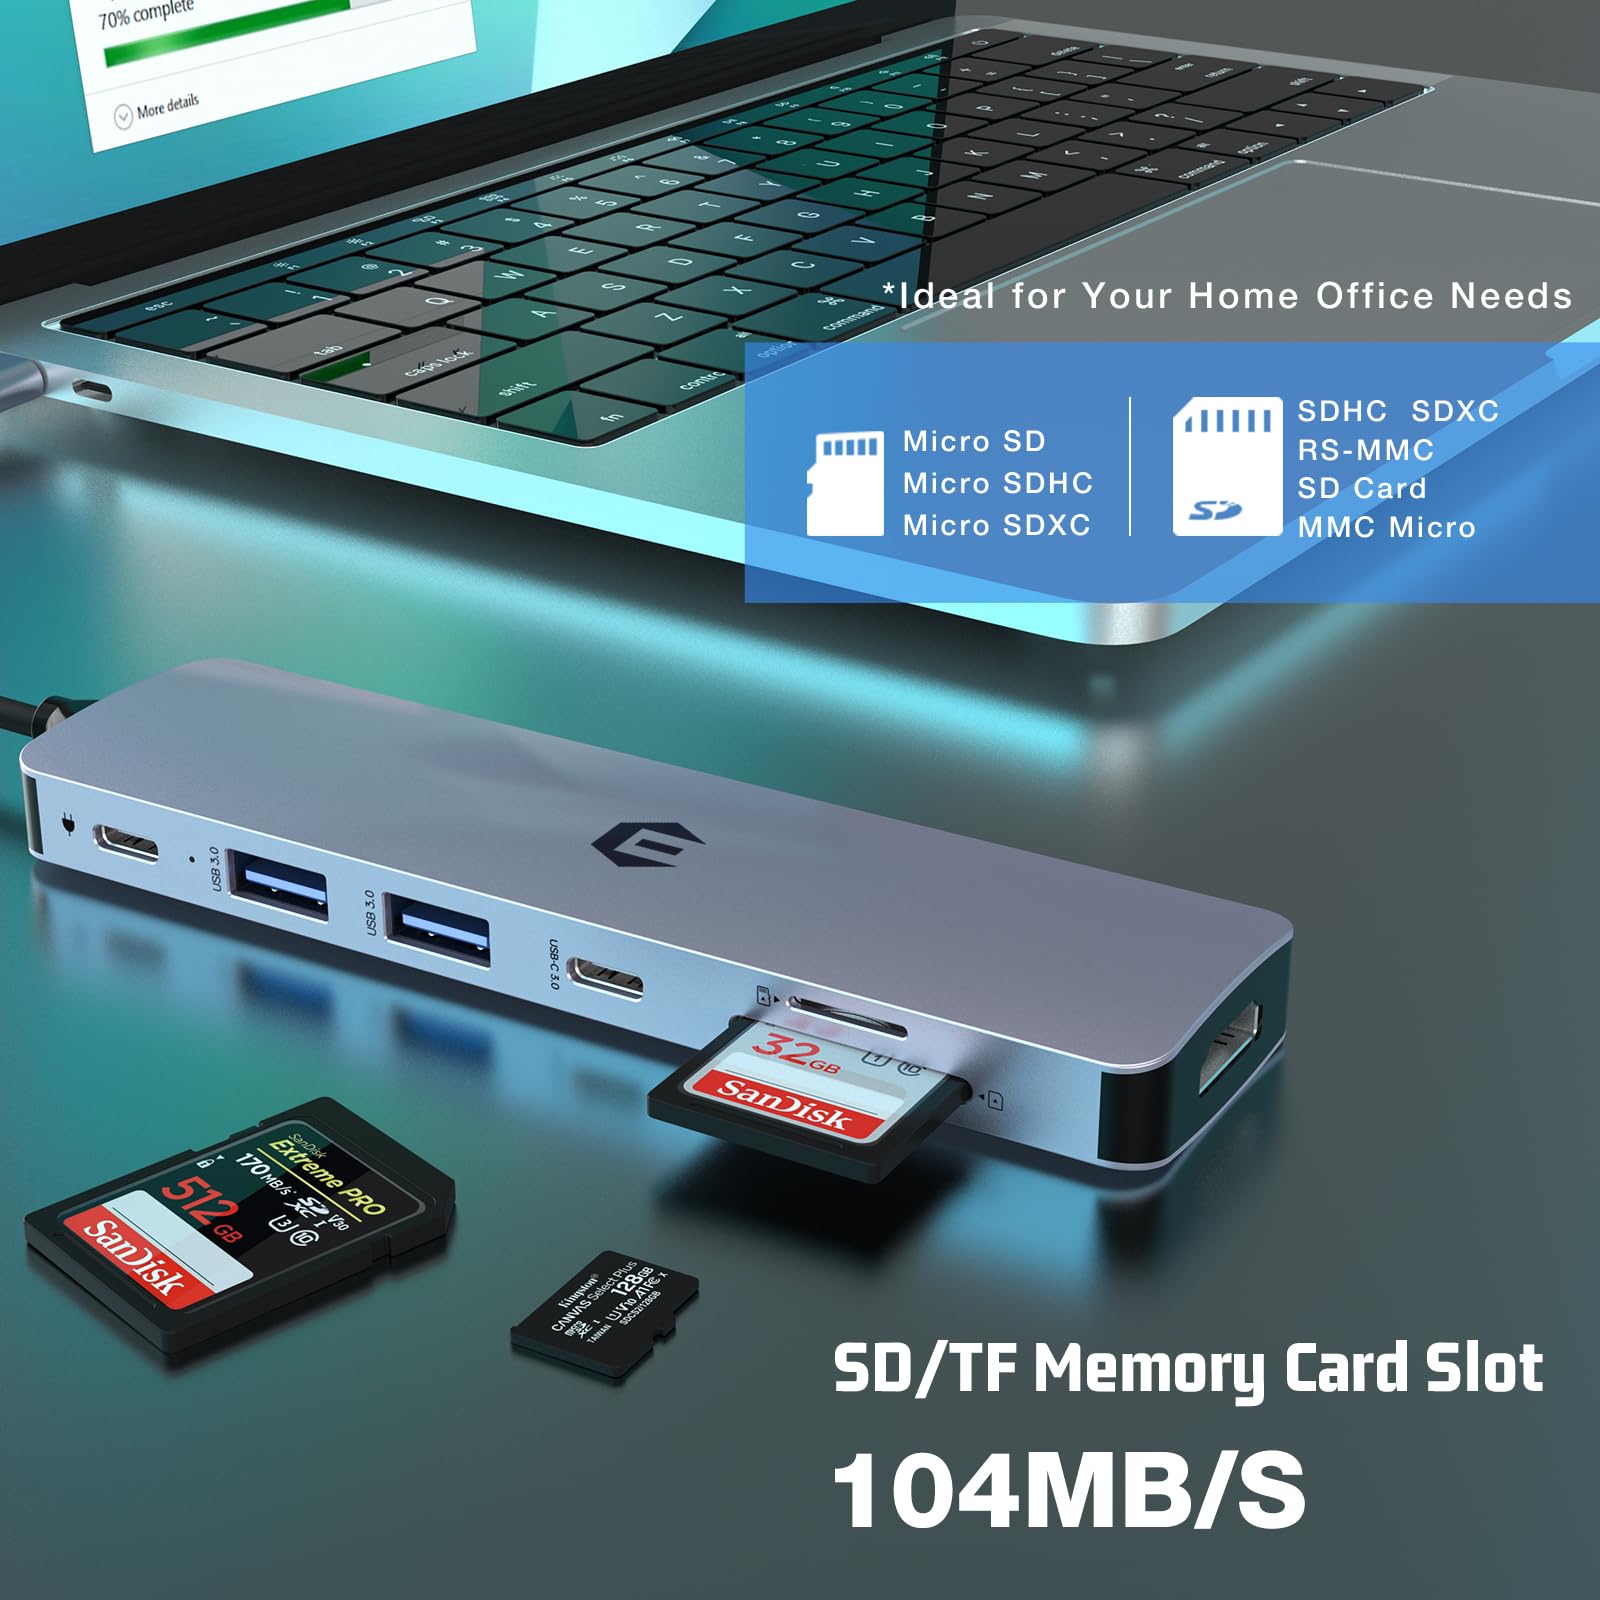 oditton 7 in 1 USB C HUB Adapter, Featuring HDMI Output, 100W Power Delivery, USB C 3.0, 2 x USB 3.0, SD and Micro SD Card Reader, Compatible for USB C Laptops Dell XPS/HP/Surface and More